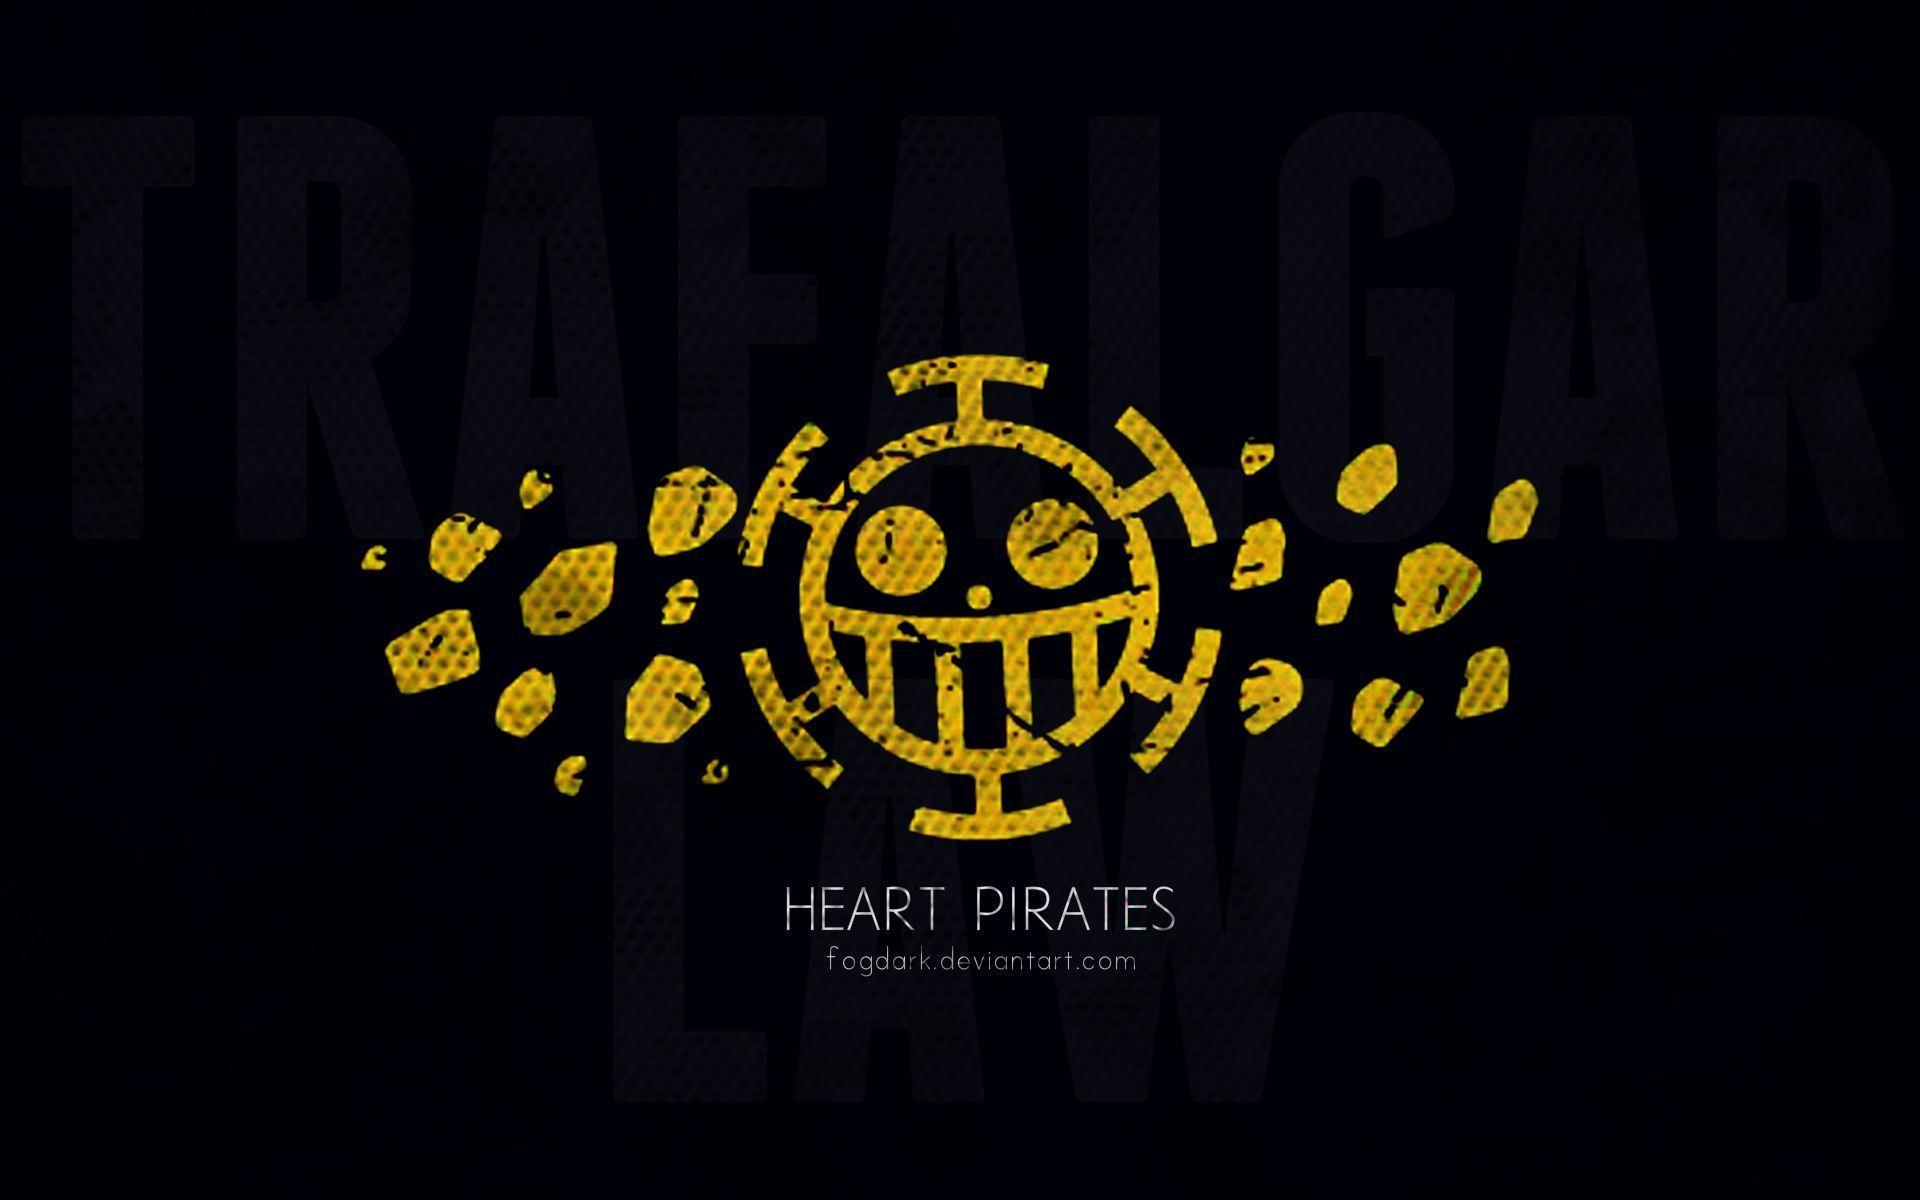 Heart Pirates Jolly Roger Free 4K Wallpapers, Heart Pirates Jolly Roger, Anime